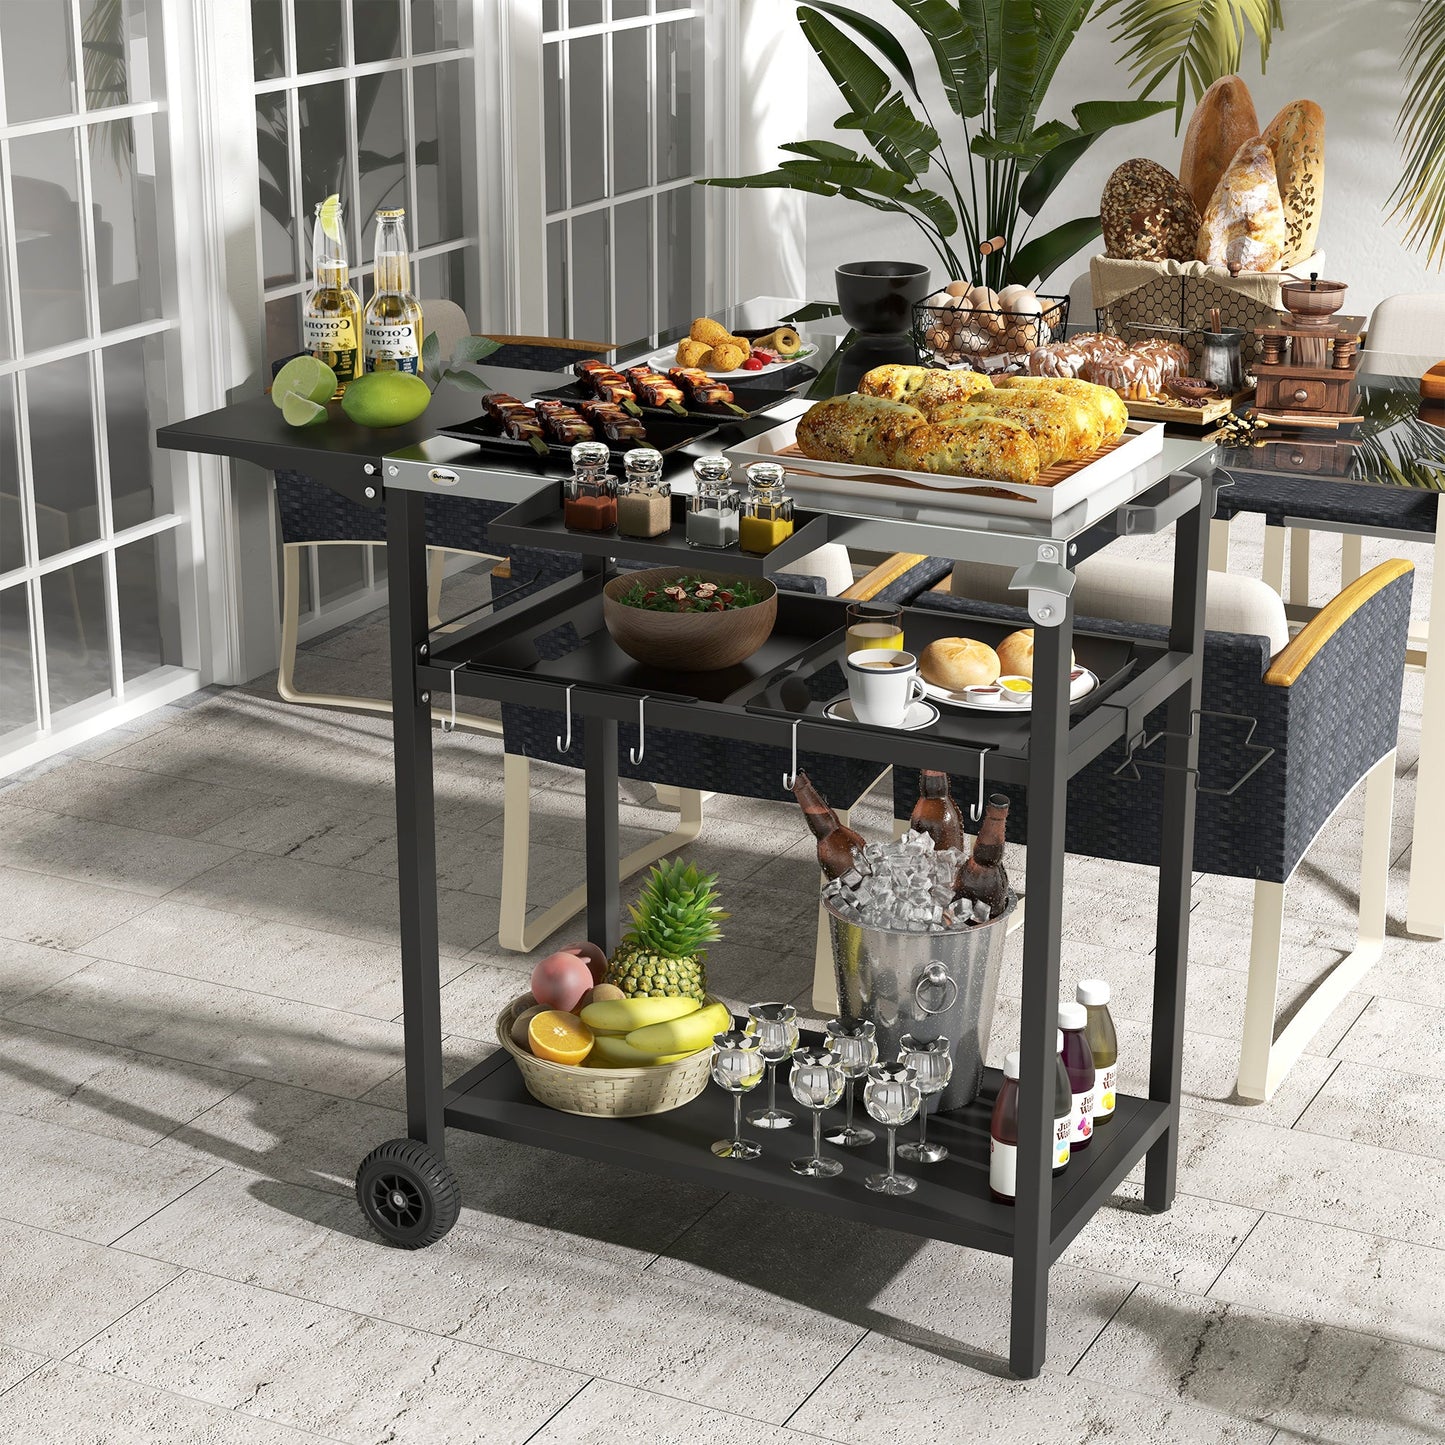 -Outsunny Outdoor Bar Table w/ Stainless Steel Tabletop, Outdoor Kitchen Island w/ 2-Tier Shelf & Wheels, Patio Serving Cart for Poolside Garden, Black - Outdoor Style Company